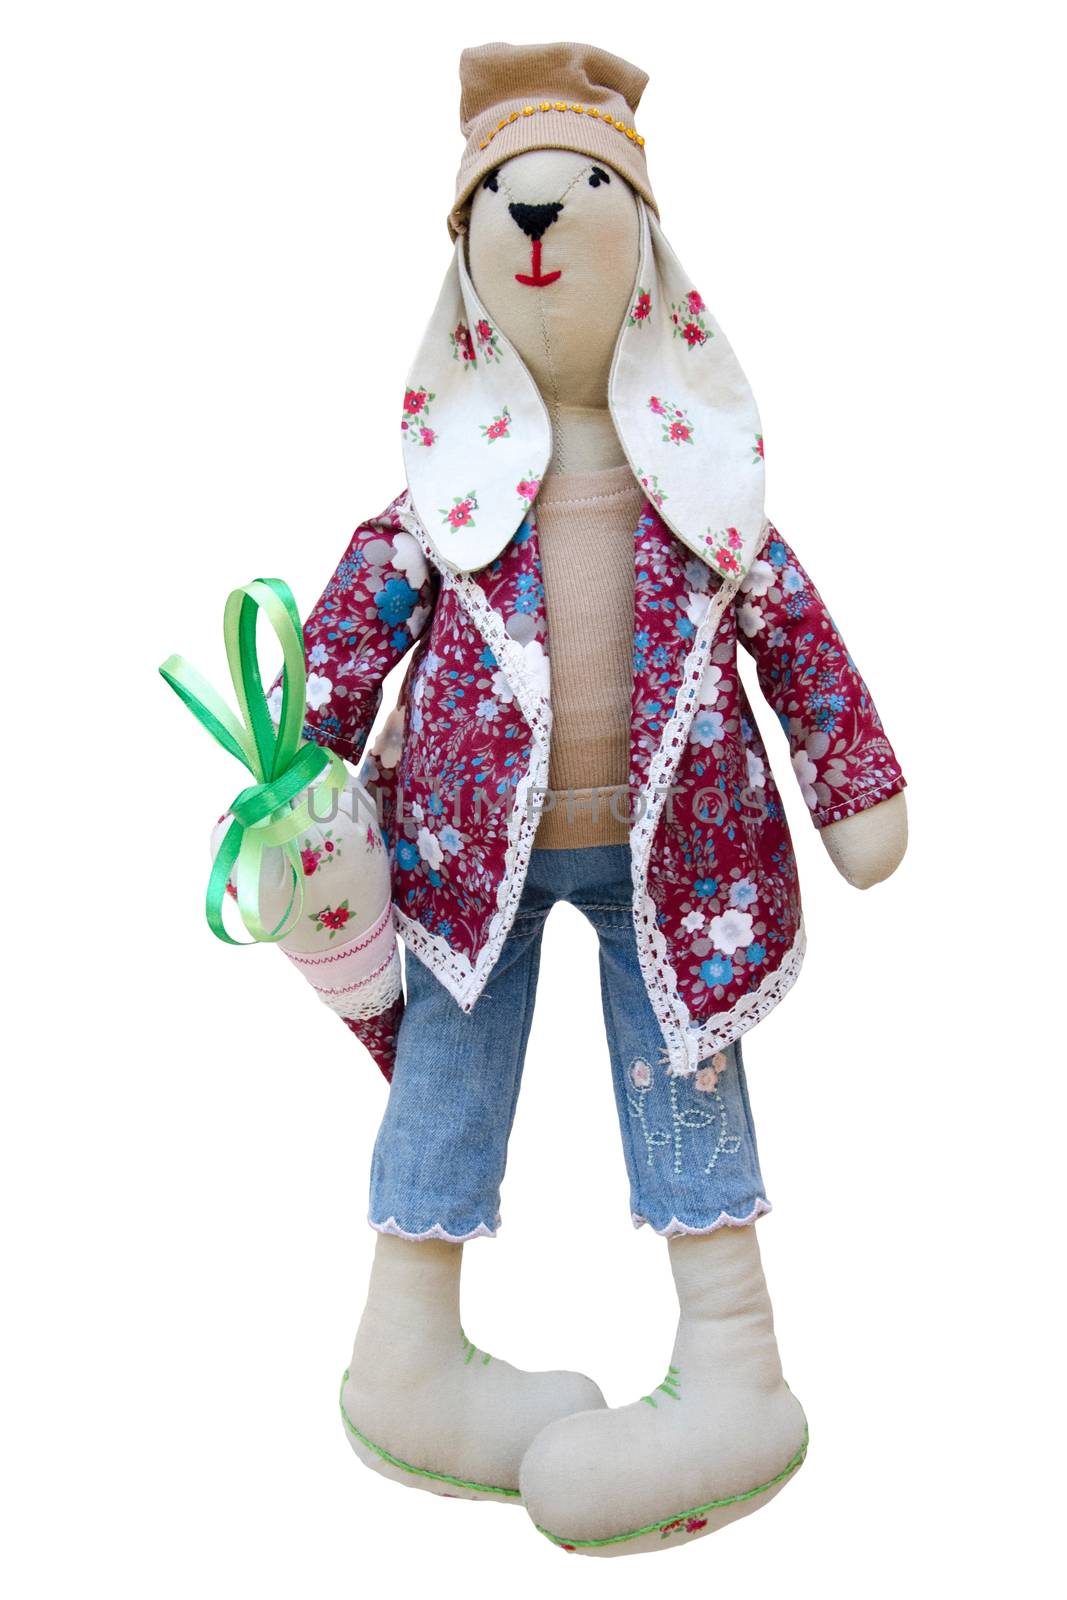 The Isolated handmade doll hare in fashionable clothes with carrots